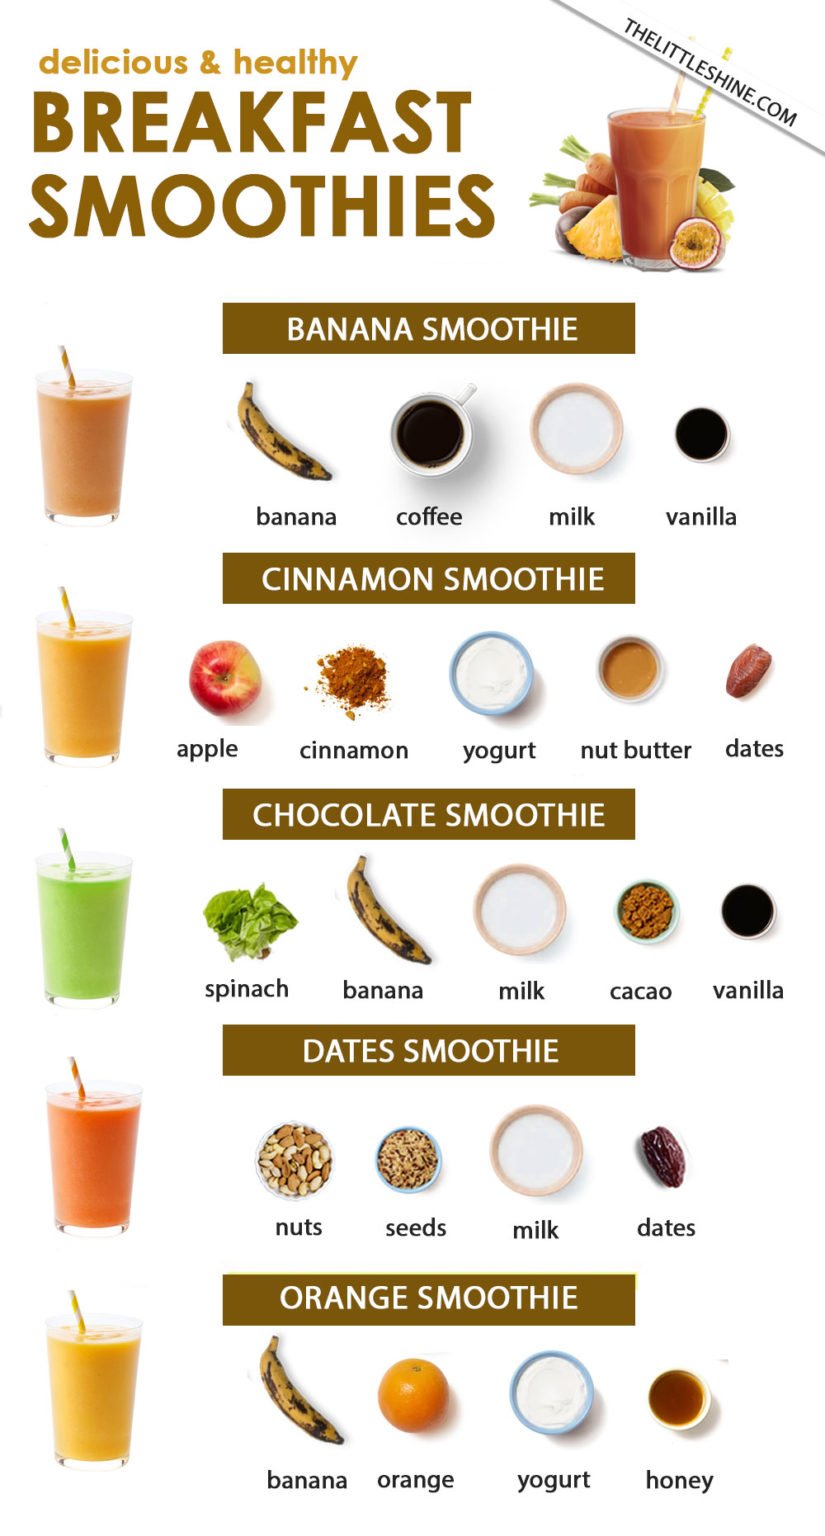 2 mins Breakfast - EASY SMOOTHIE RECIPES - The Little Shine